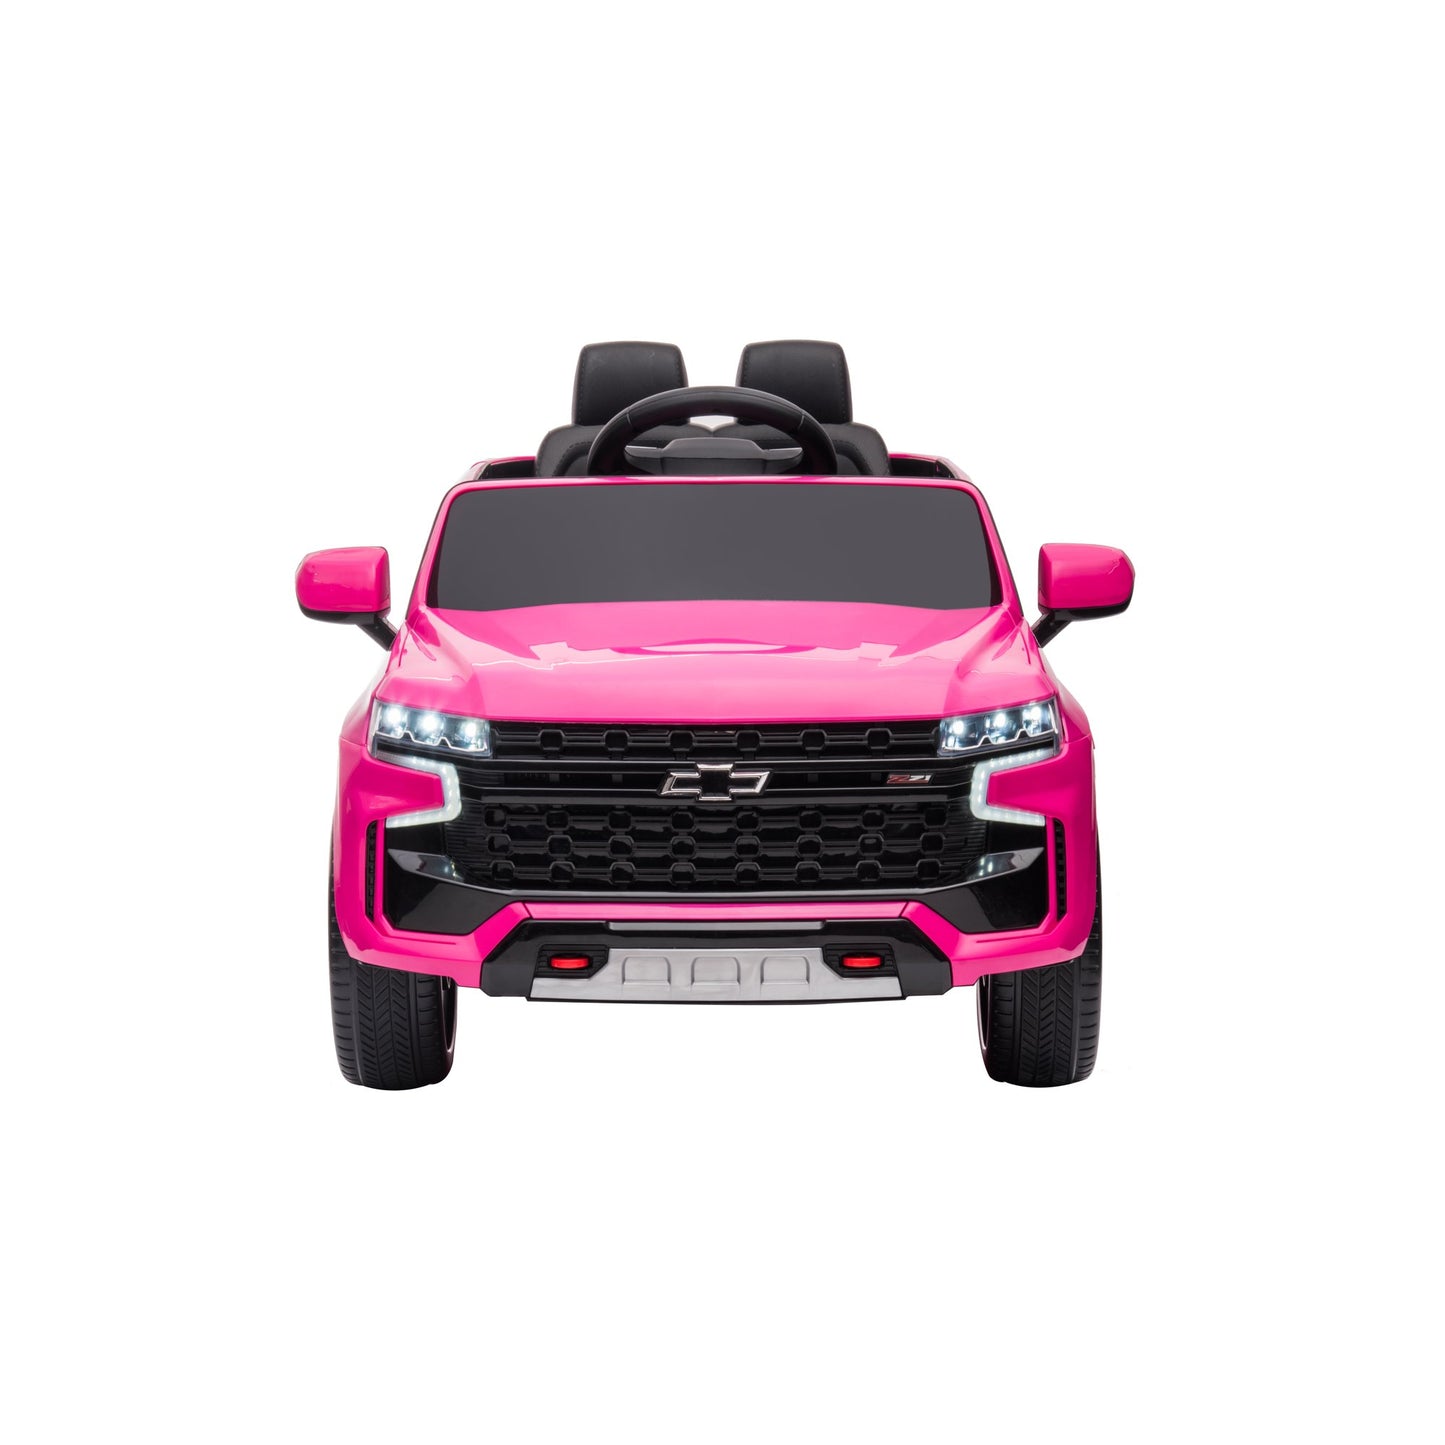 iRerts Licensed Chevrolet Tahoe 12V Battery Powered Car Toy for Girls Boys, Kids Ride on Car for 3 4 5 Yrs with Remote Control, LED Lights, MP3, Seat Belt, Electric Truck for Kids Birthday Gift, Pink